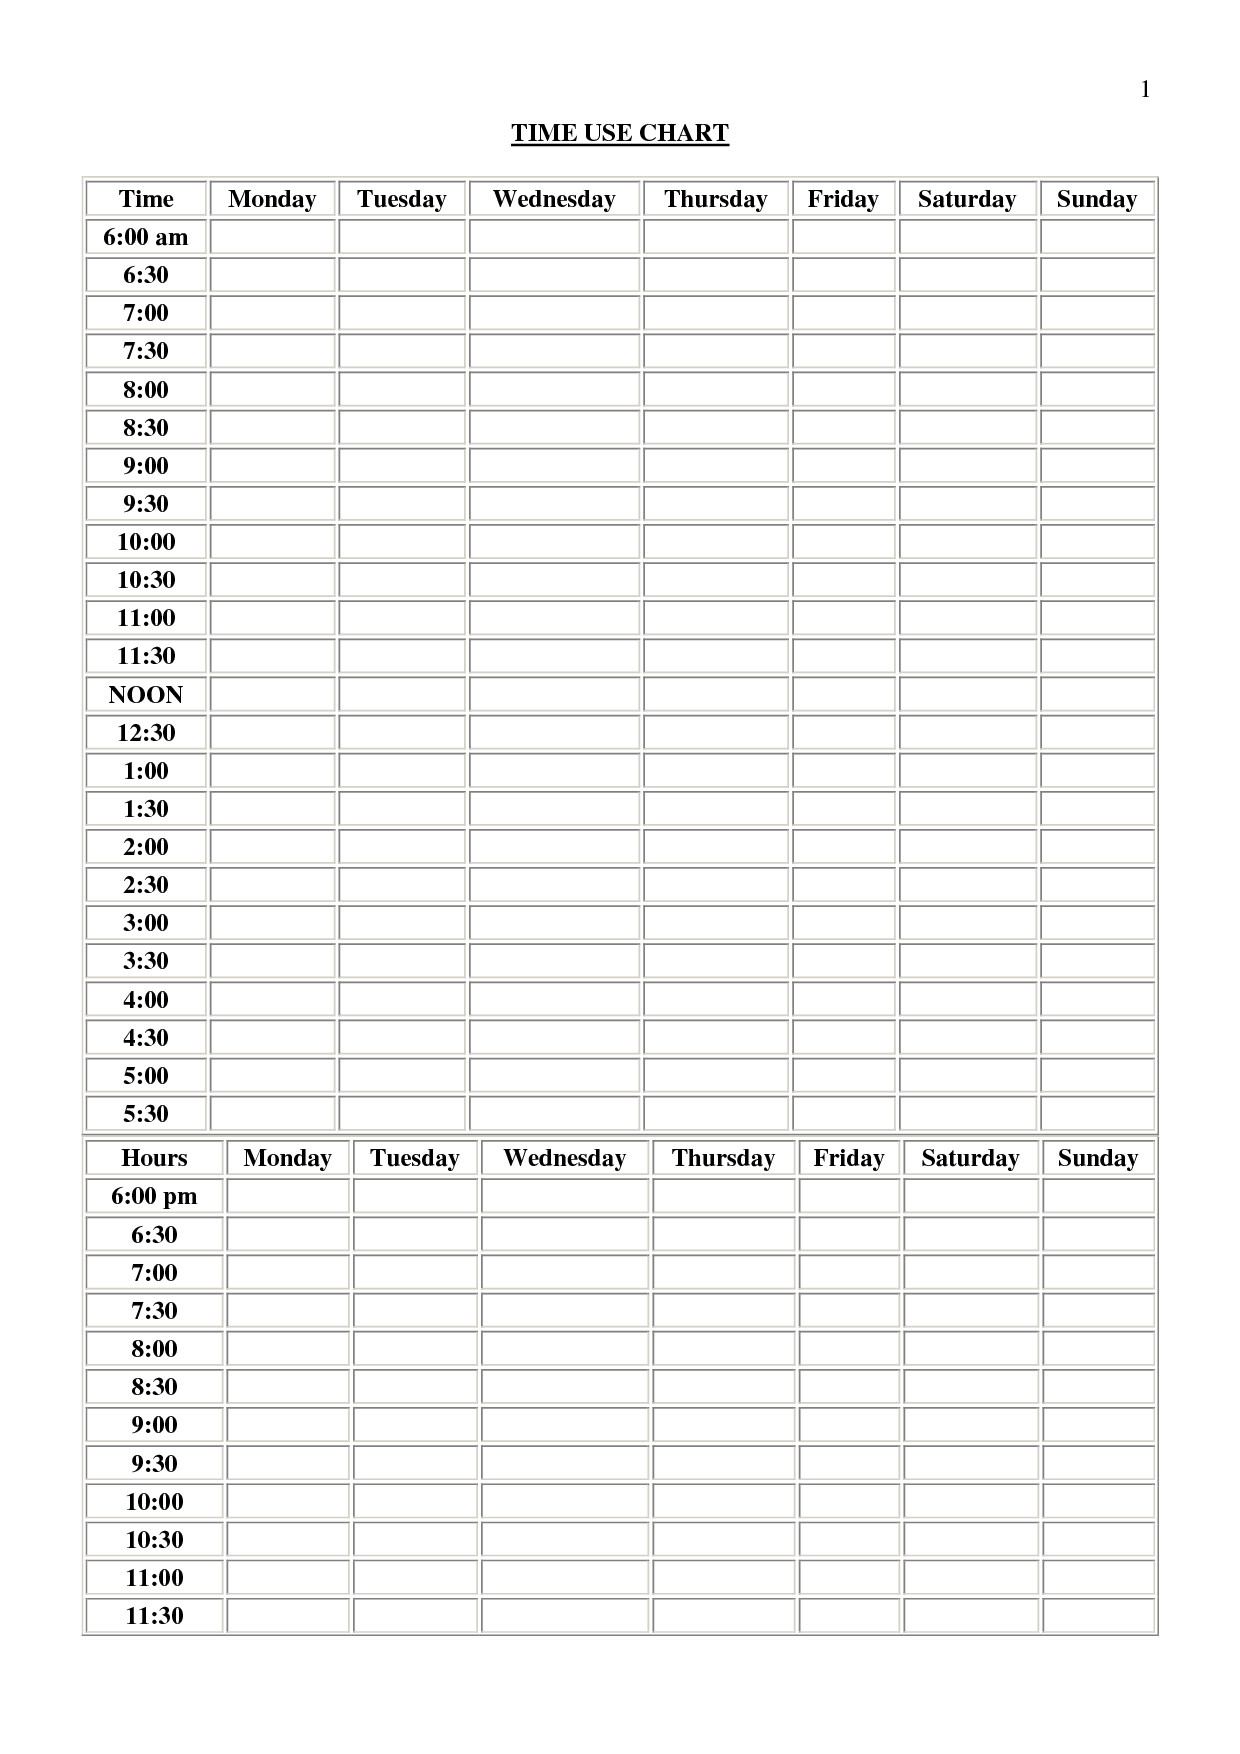 Hourly Chart Template 7 Best Of 24 Hour Time Chart Printable 24 Hour